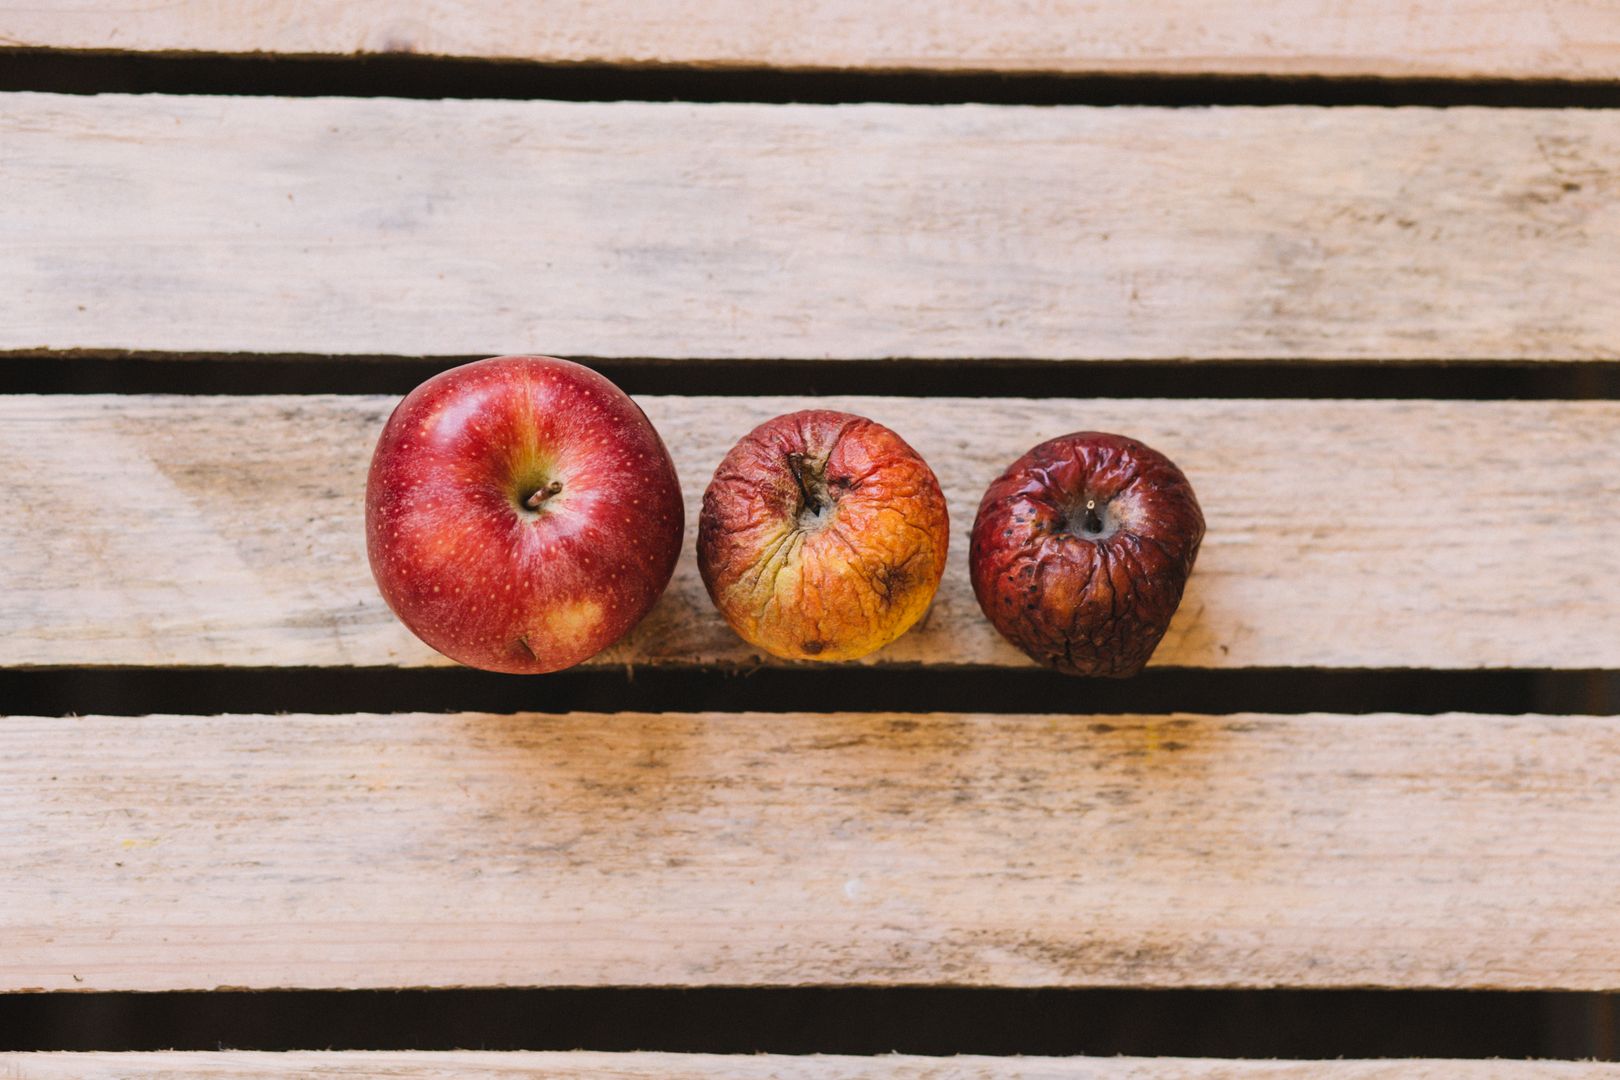 Three red apples of different sizes lying on wood.